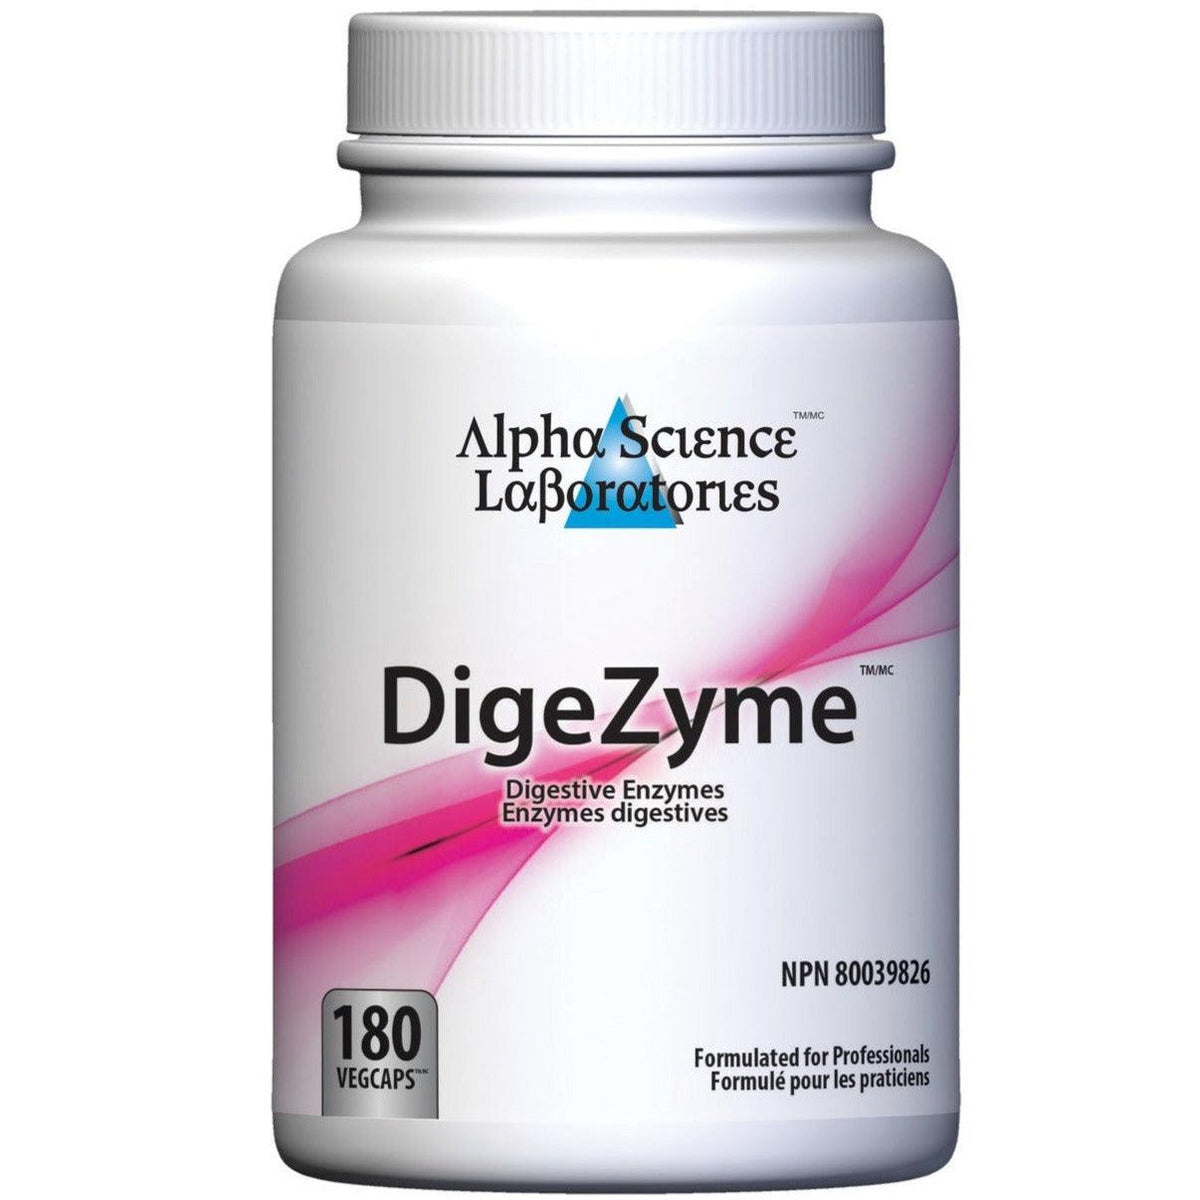 Alpha Science Digezyme 180 Capsules Supplements - Digestive Enzymes at Village Vitamin Store